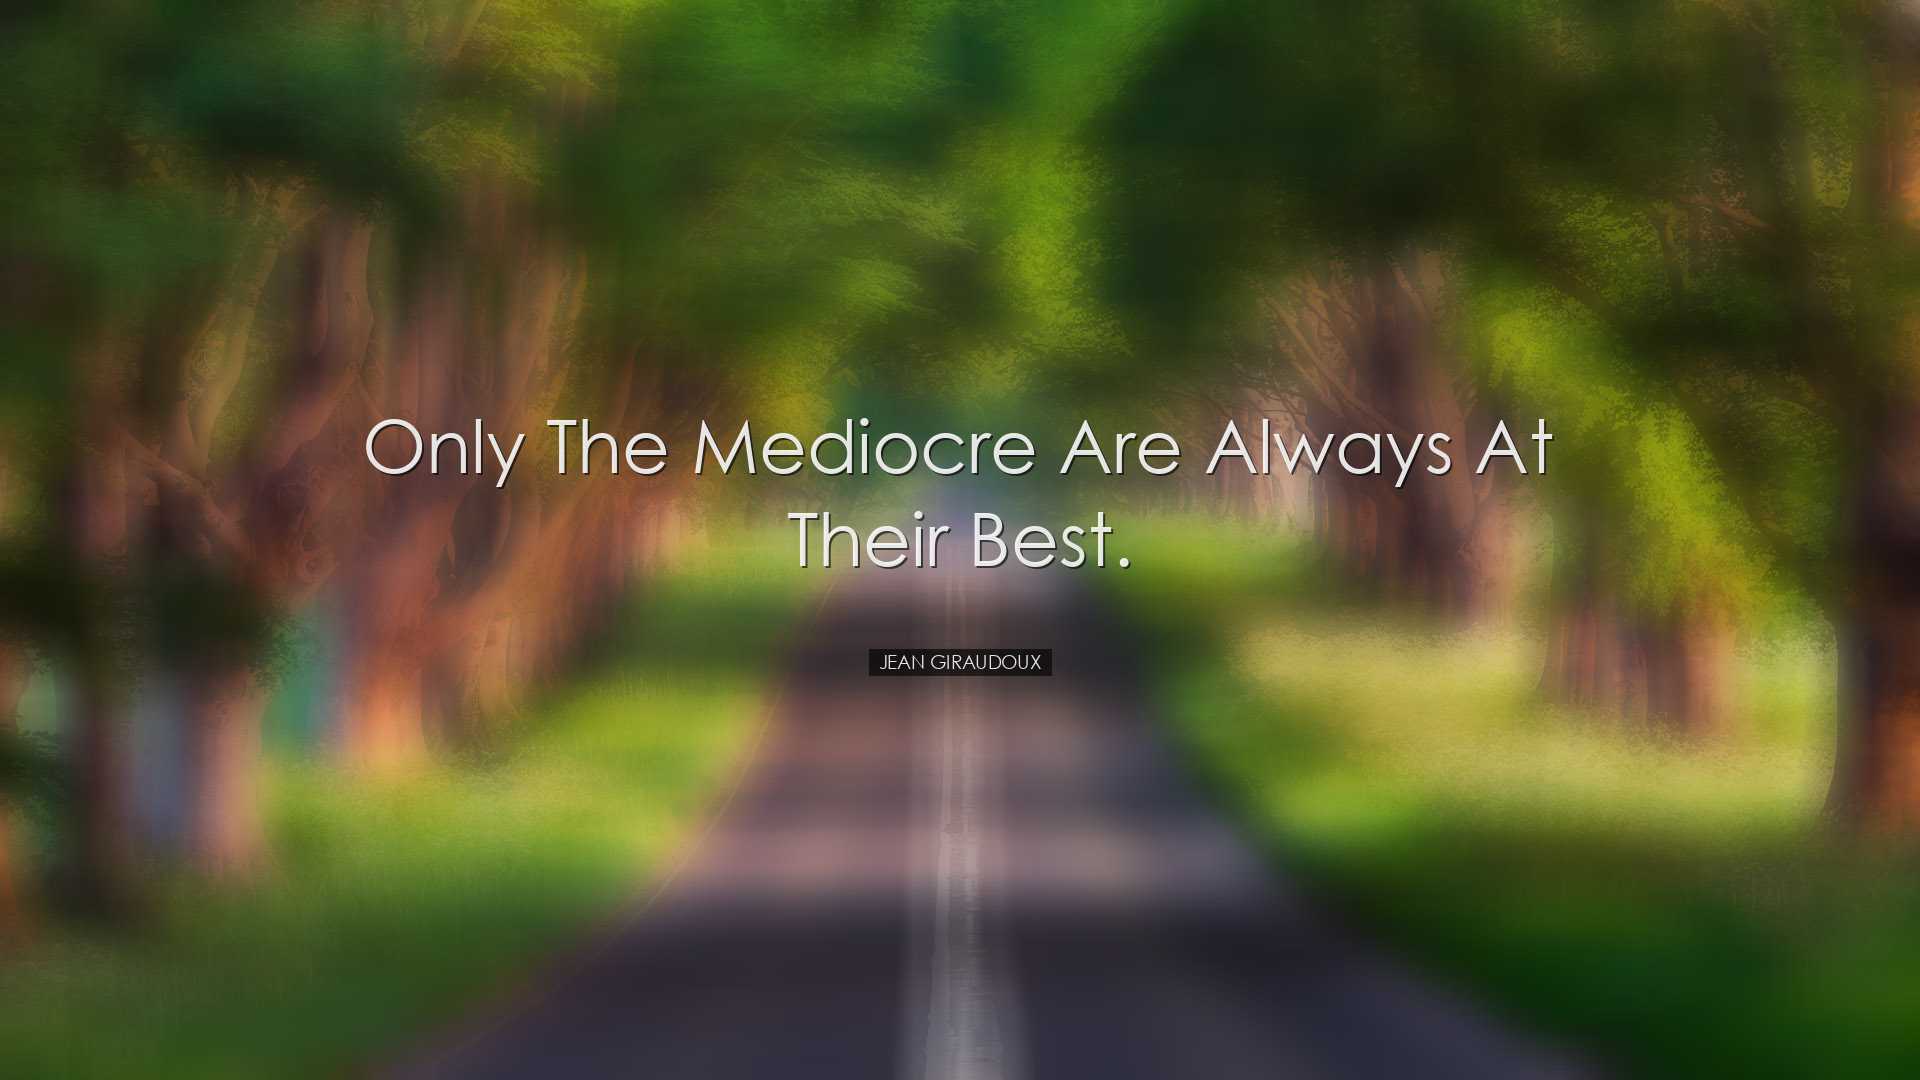 Only the mediocre are always at their best. - Jean Giraudoux